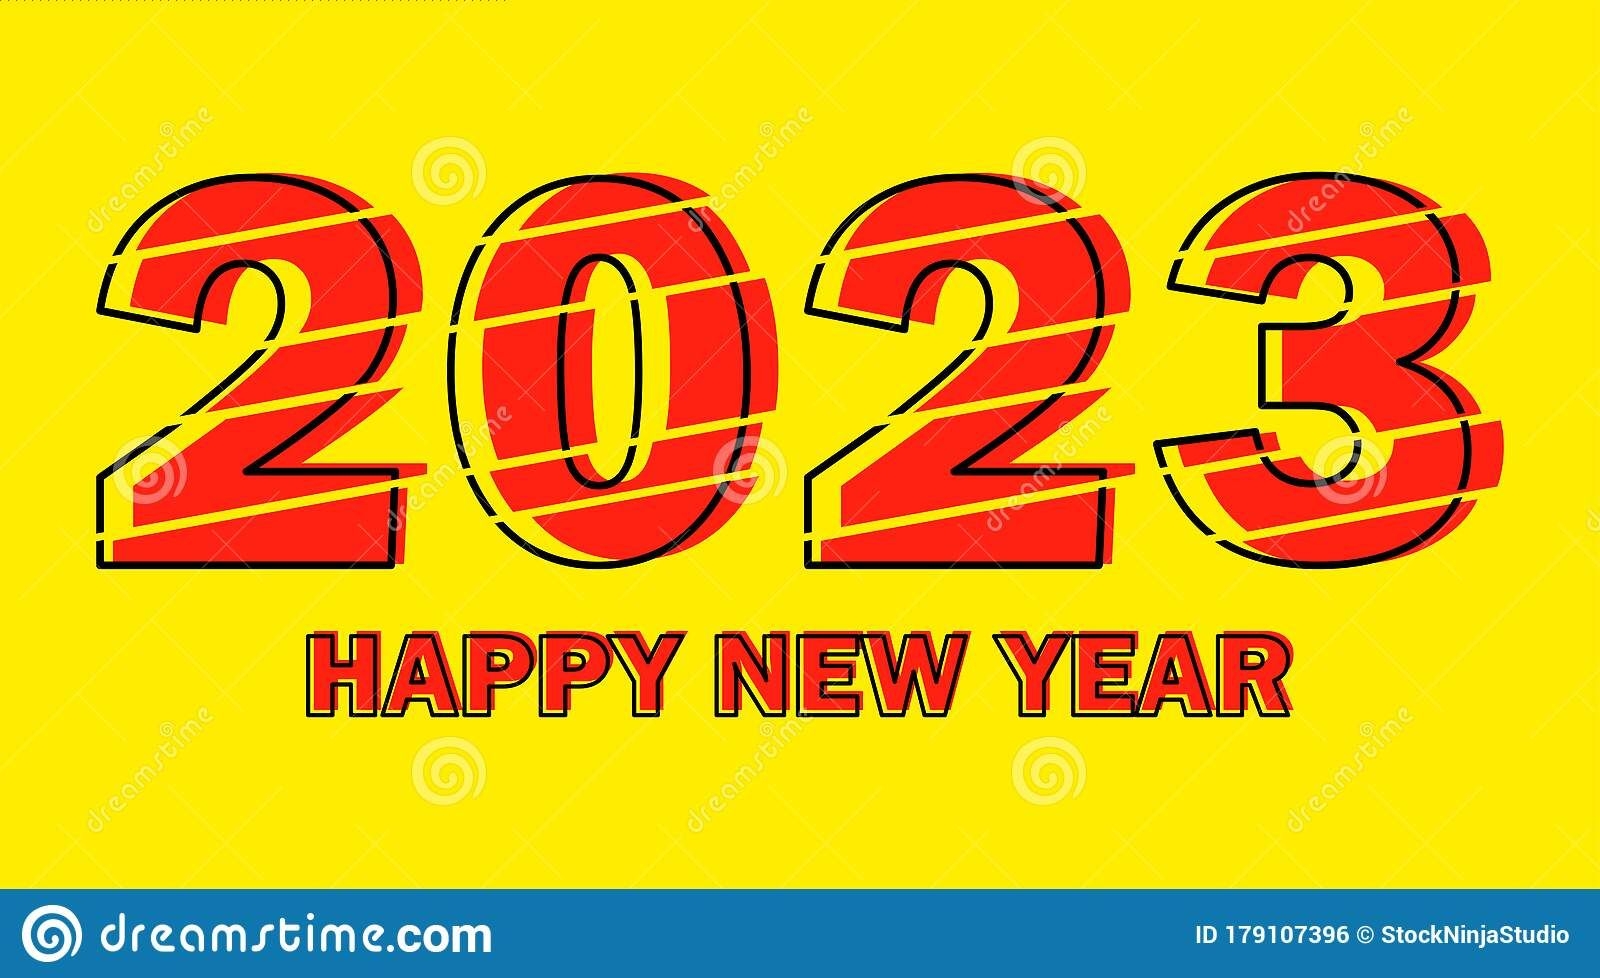 Happy New Year 2023 Design Template. Modern Design For